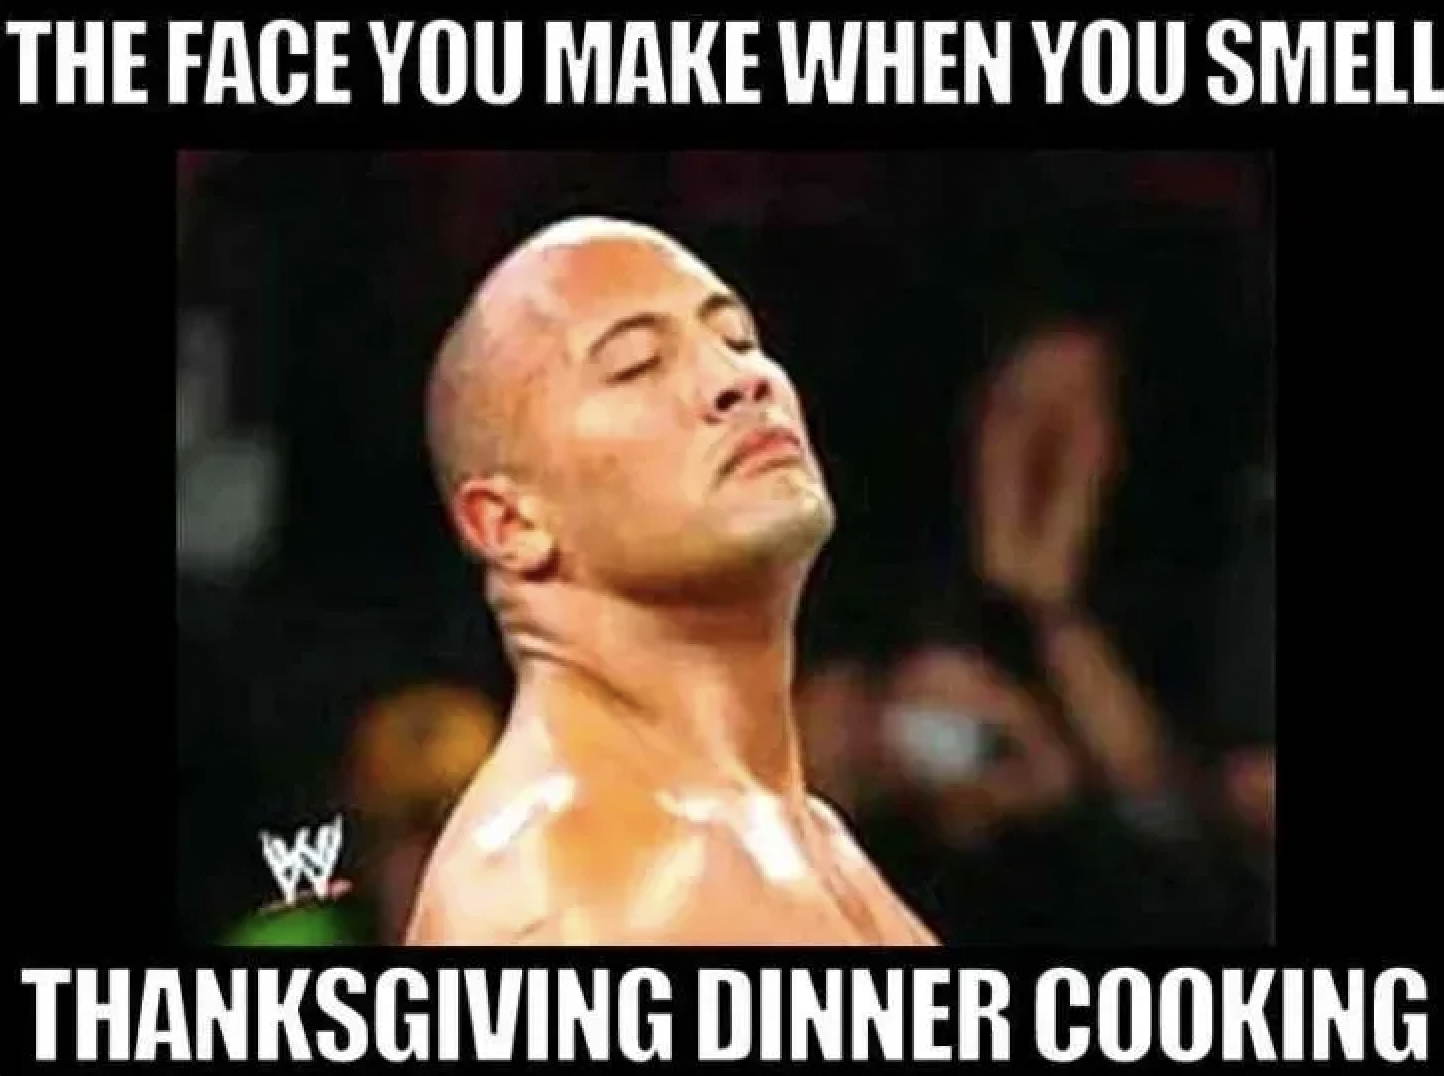 photo caption - The Face You Make When You Smell Thanksgiving Dinner Cooking